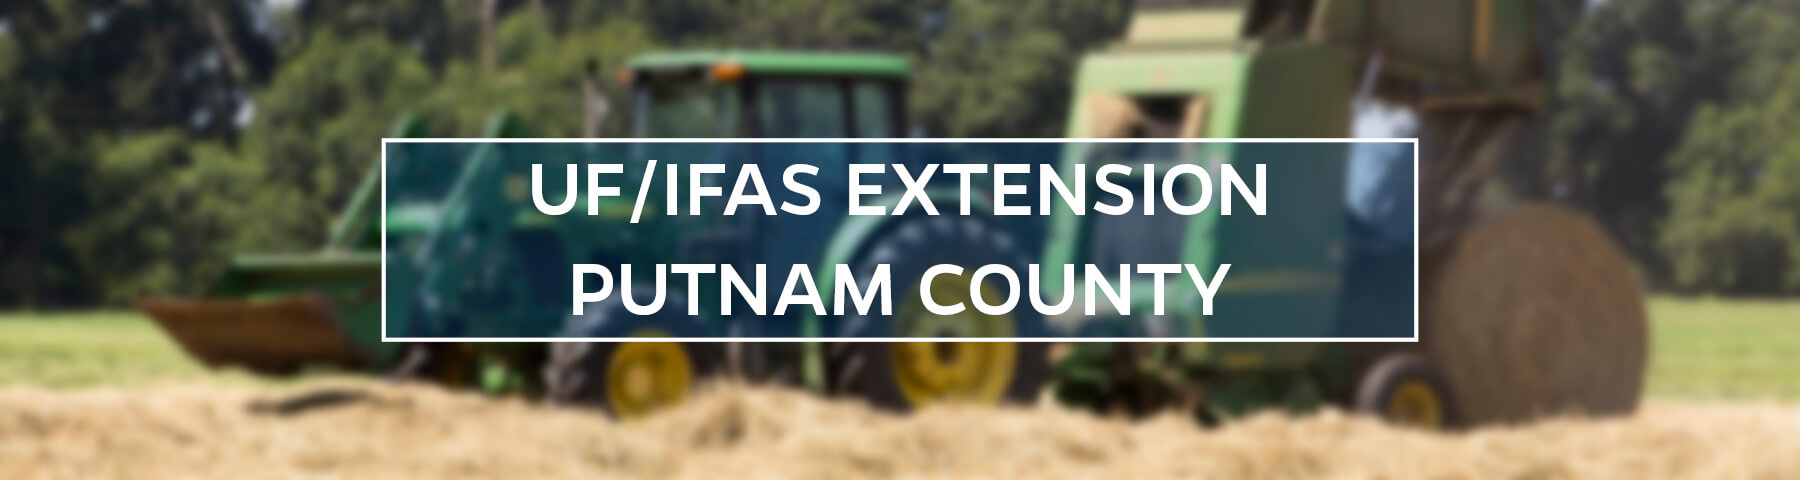 UF/IFAS Extension Putnam County